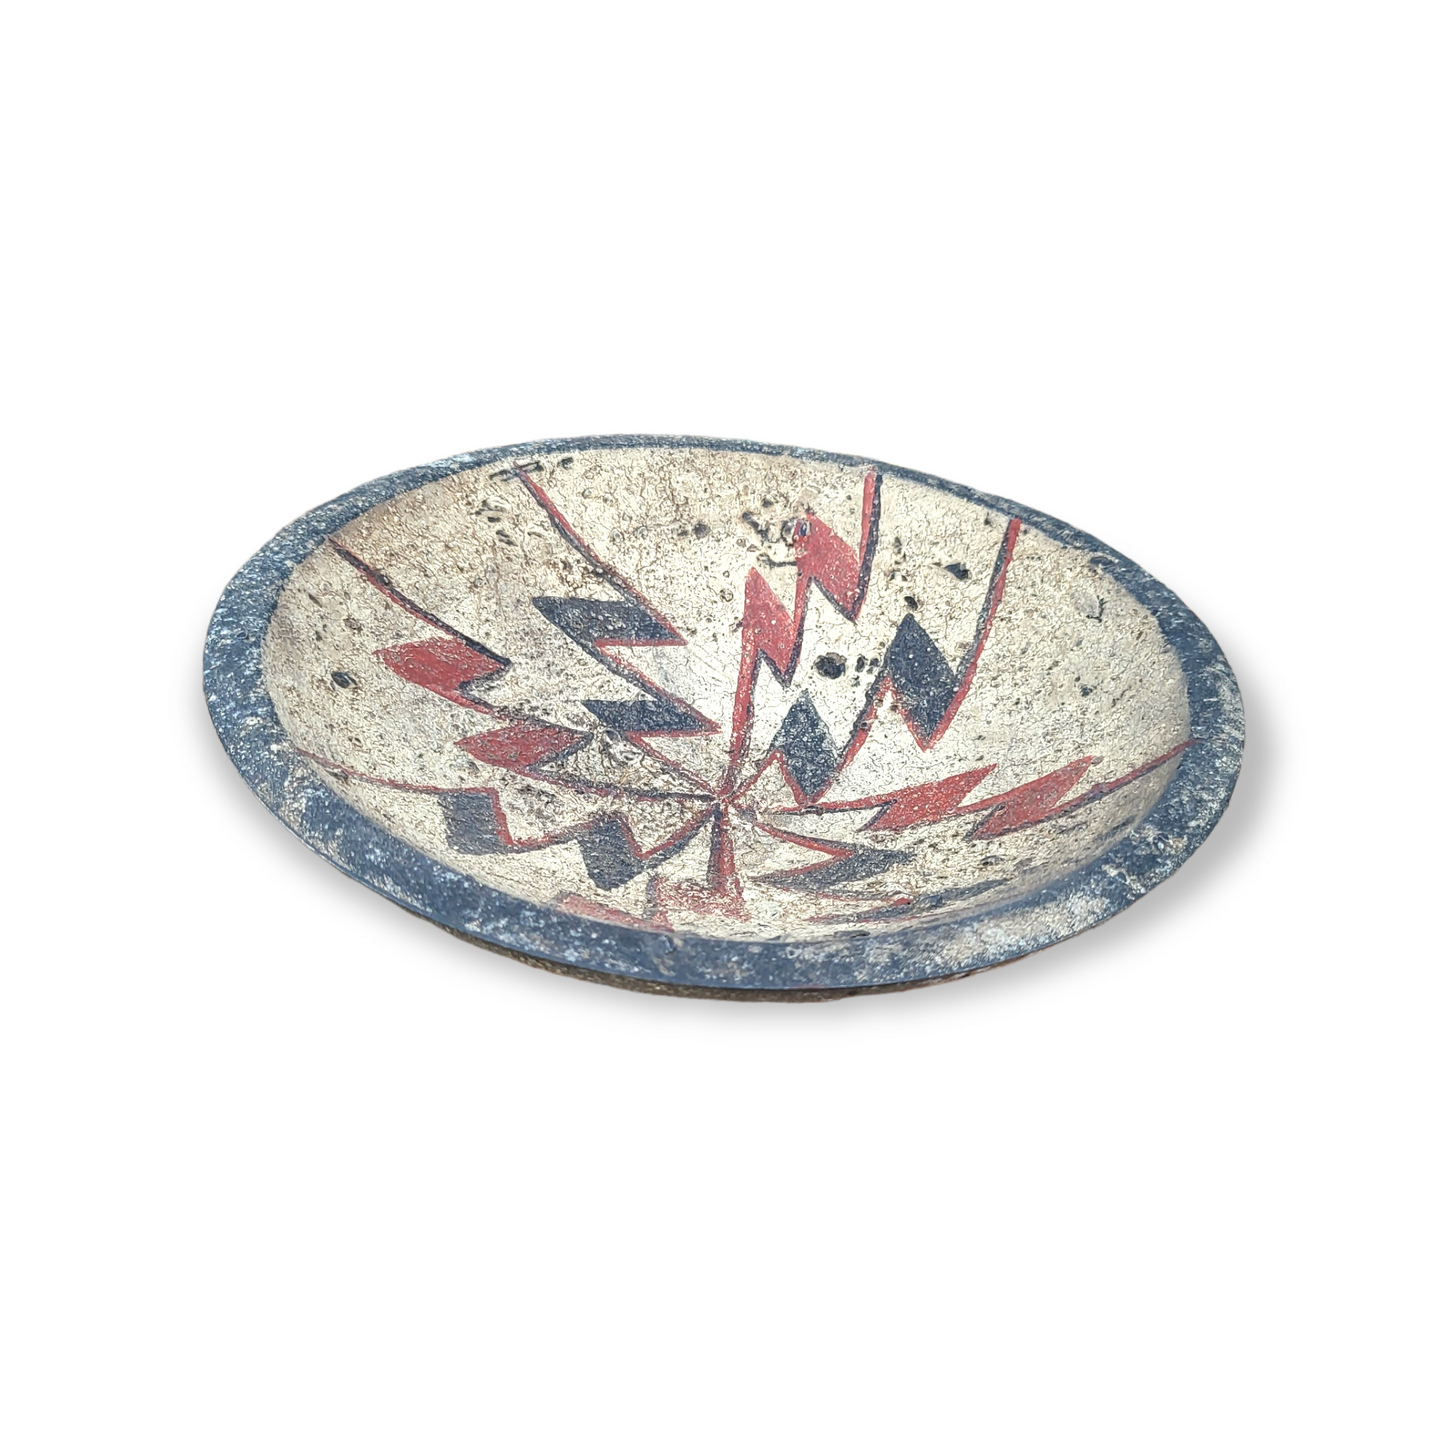 Hand-Turned/Painted Wood Bowl - Signed